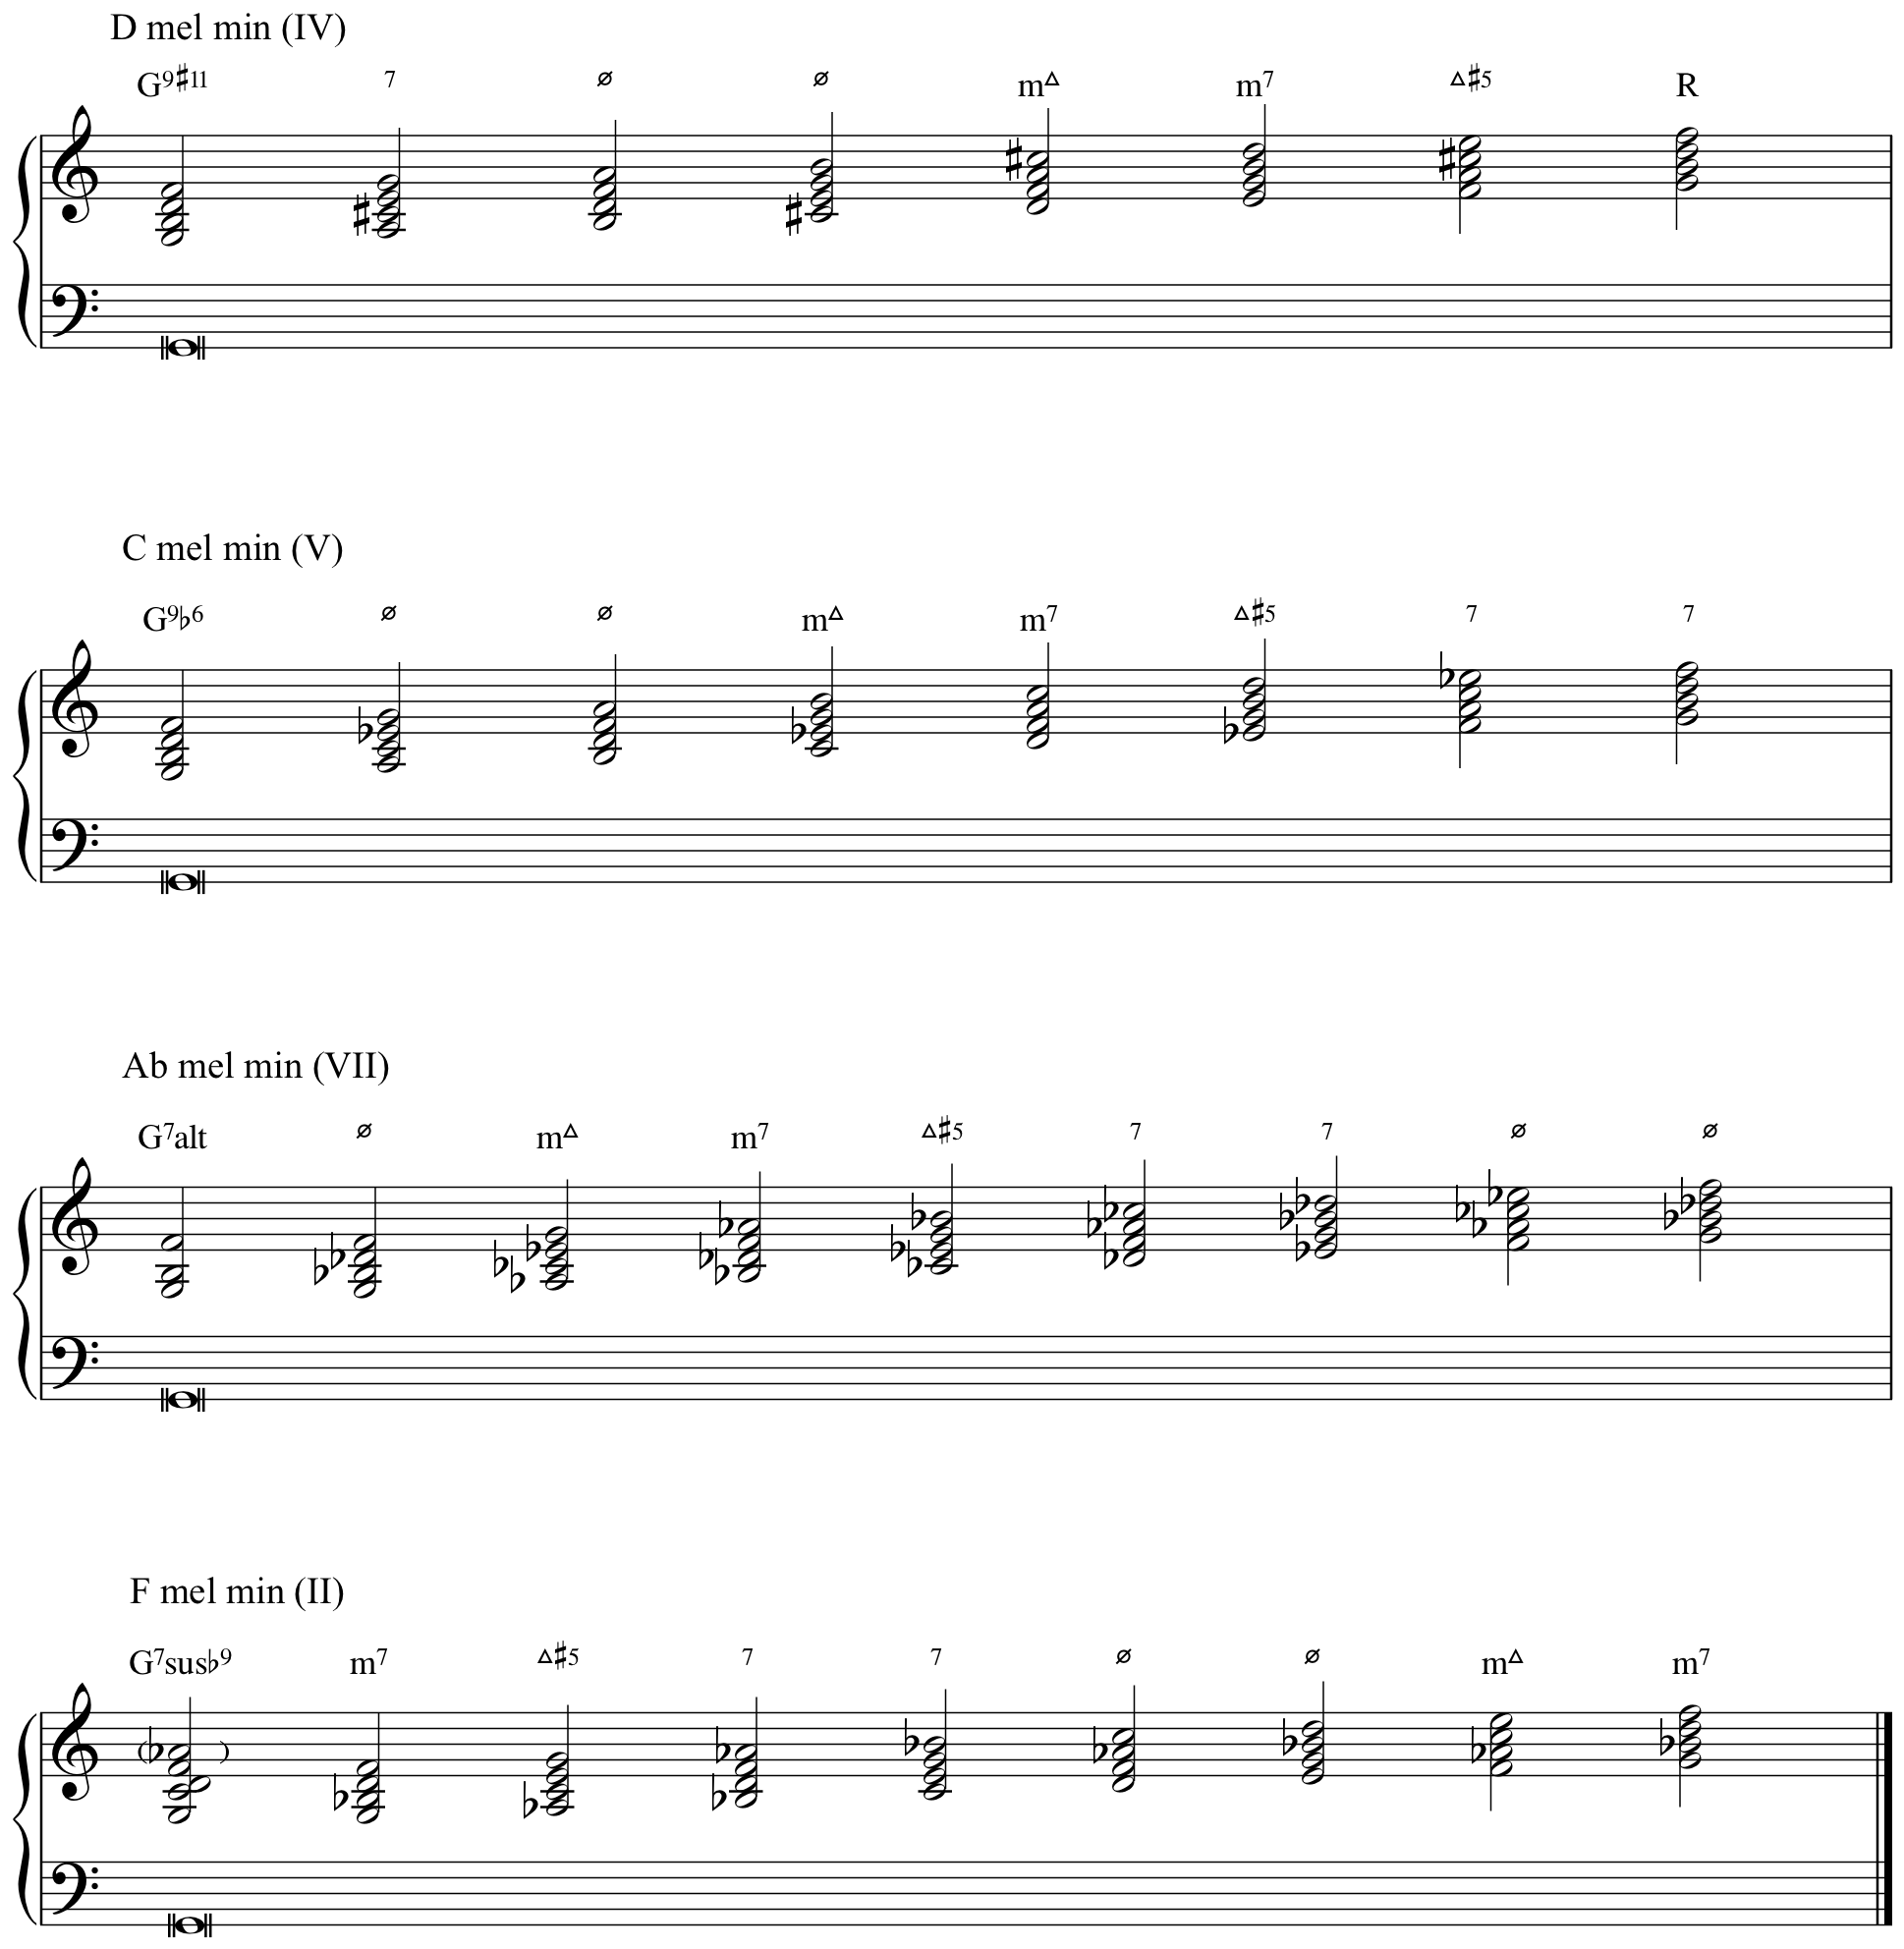 The four scalar substitutions for the dominant seventh